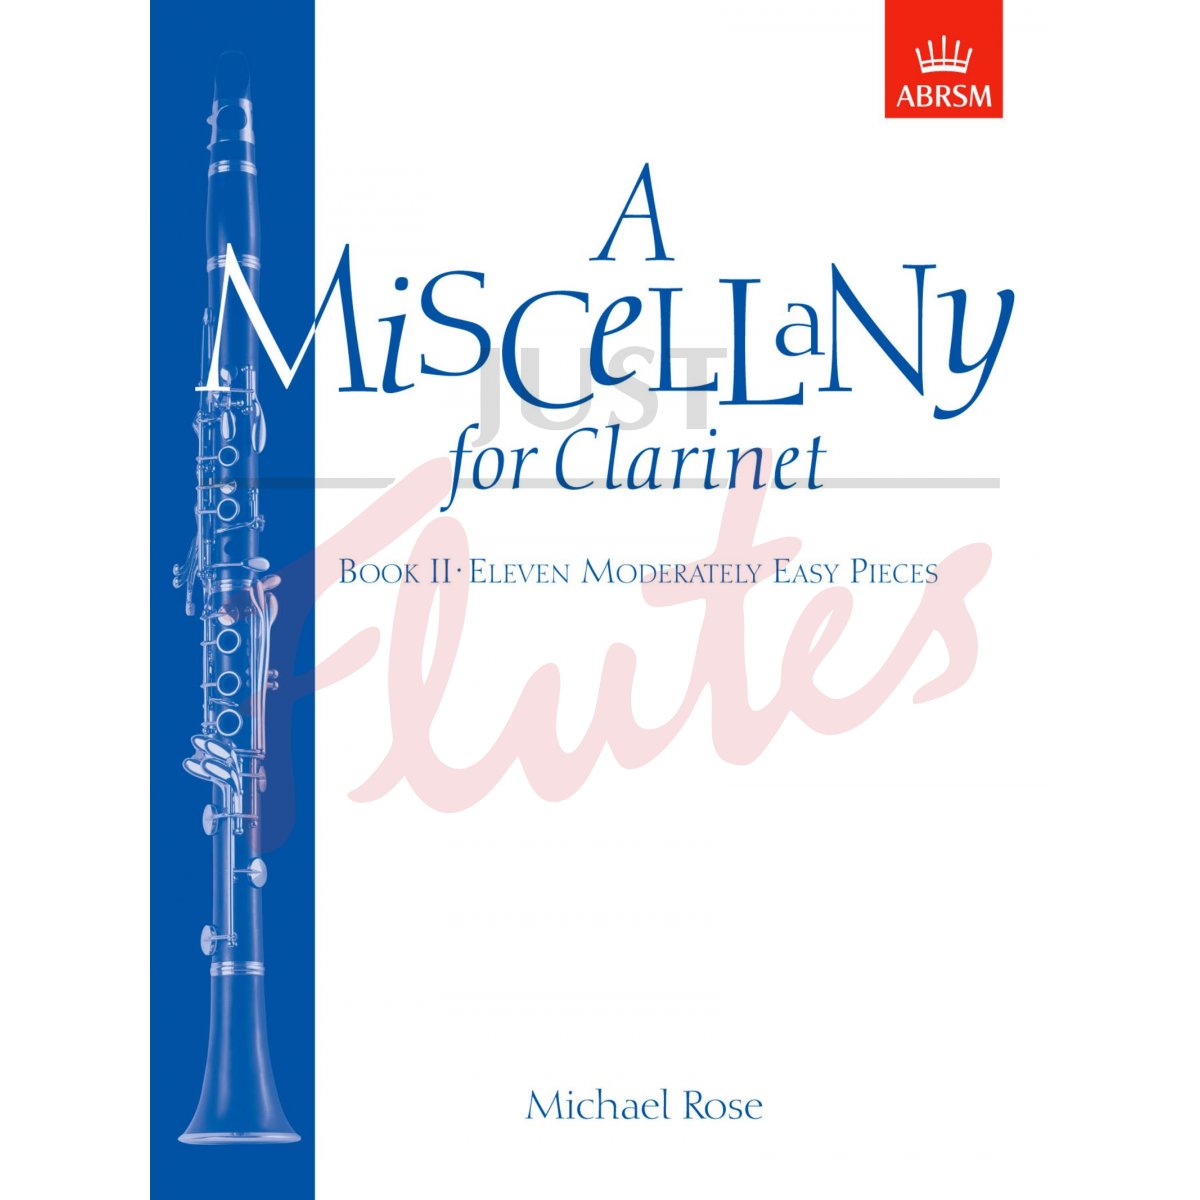 A Miscellany for Clarinet Book 2